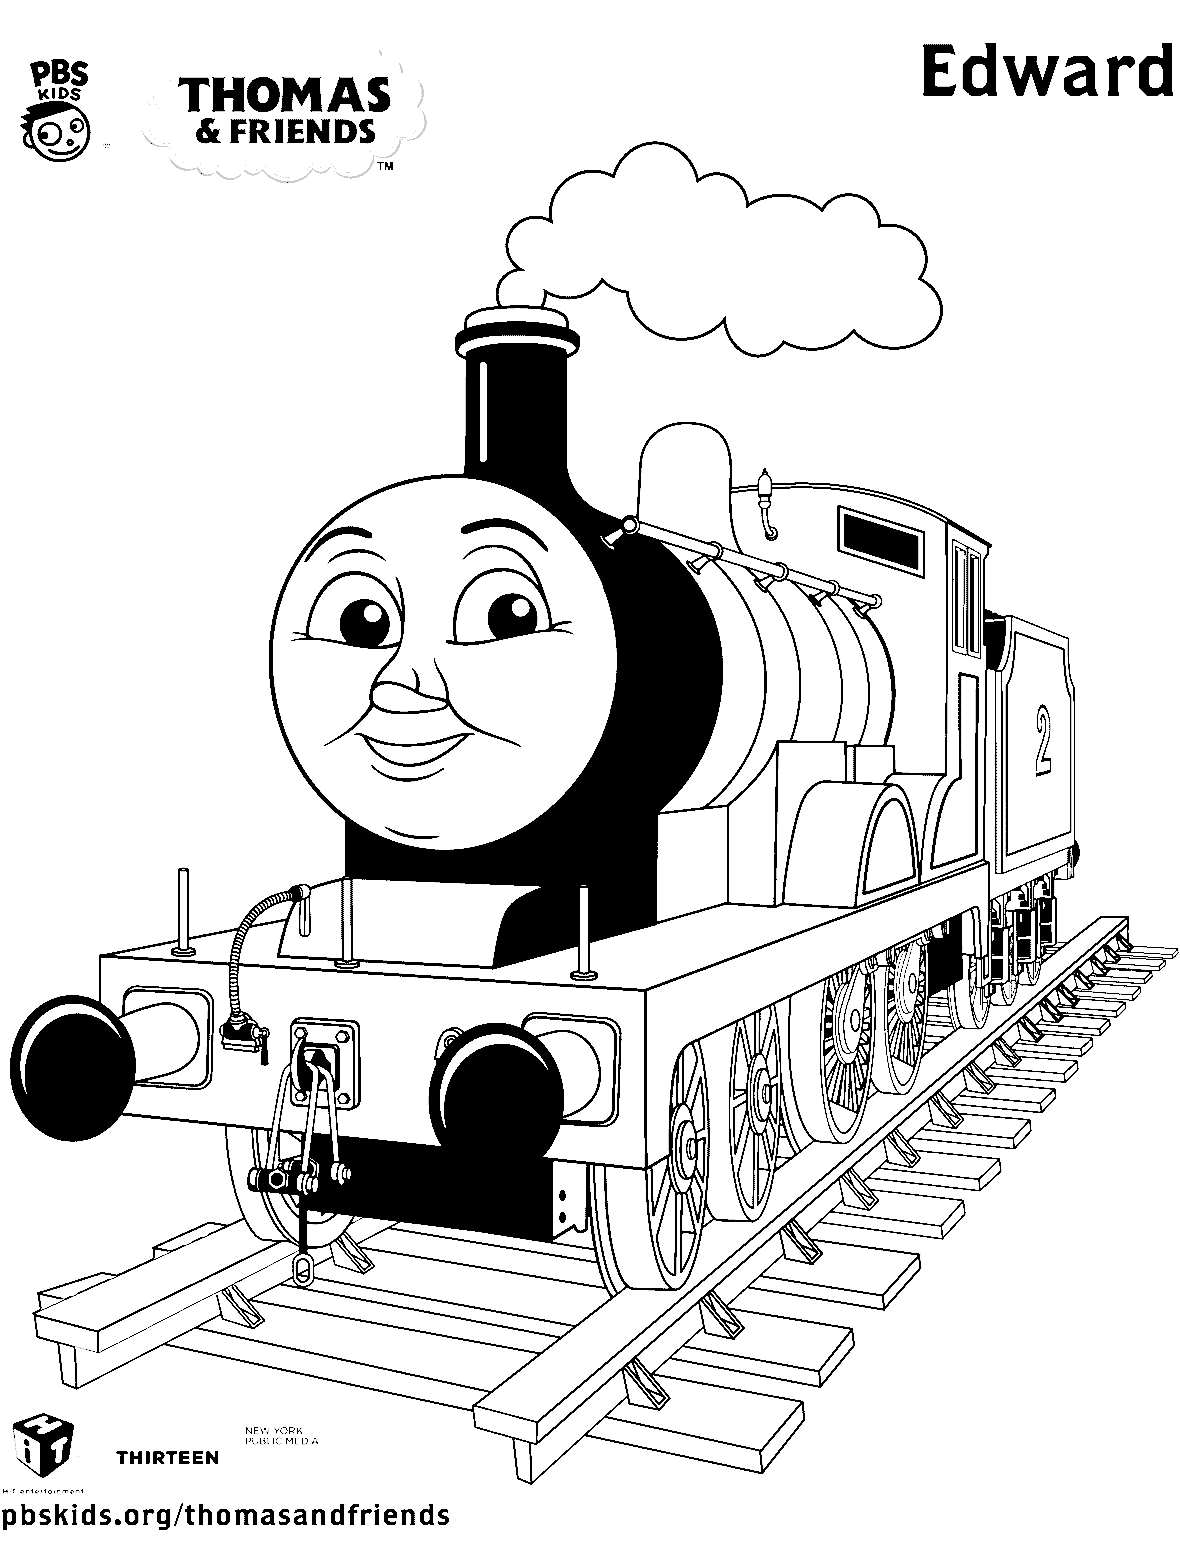 Edward Coloring Page